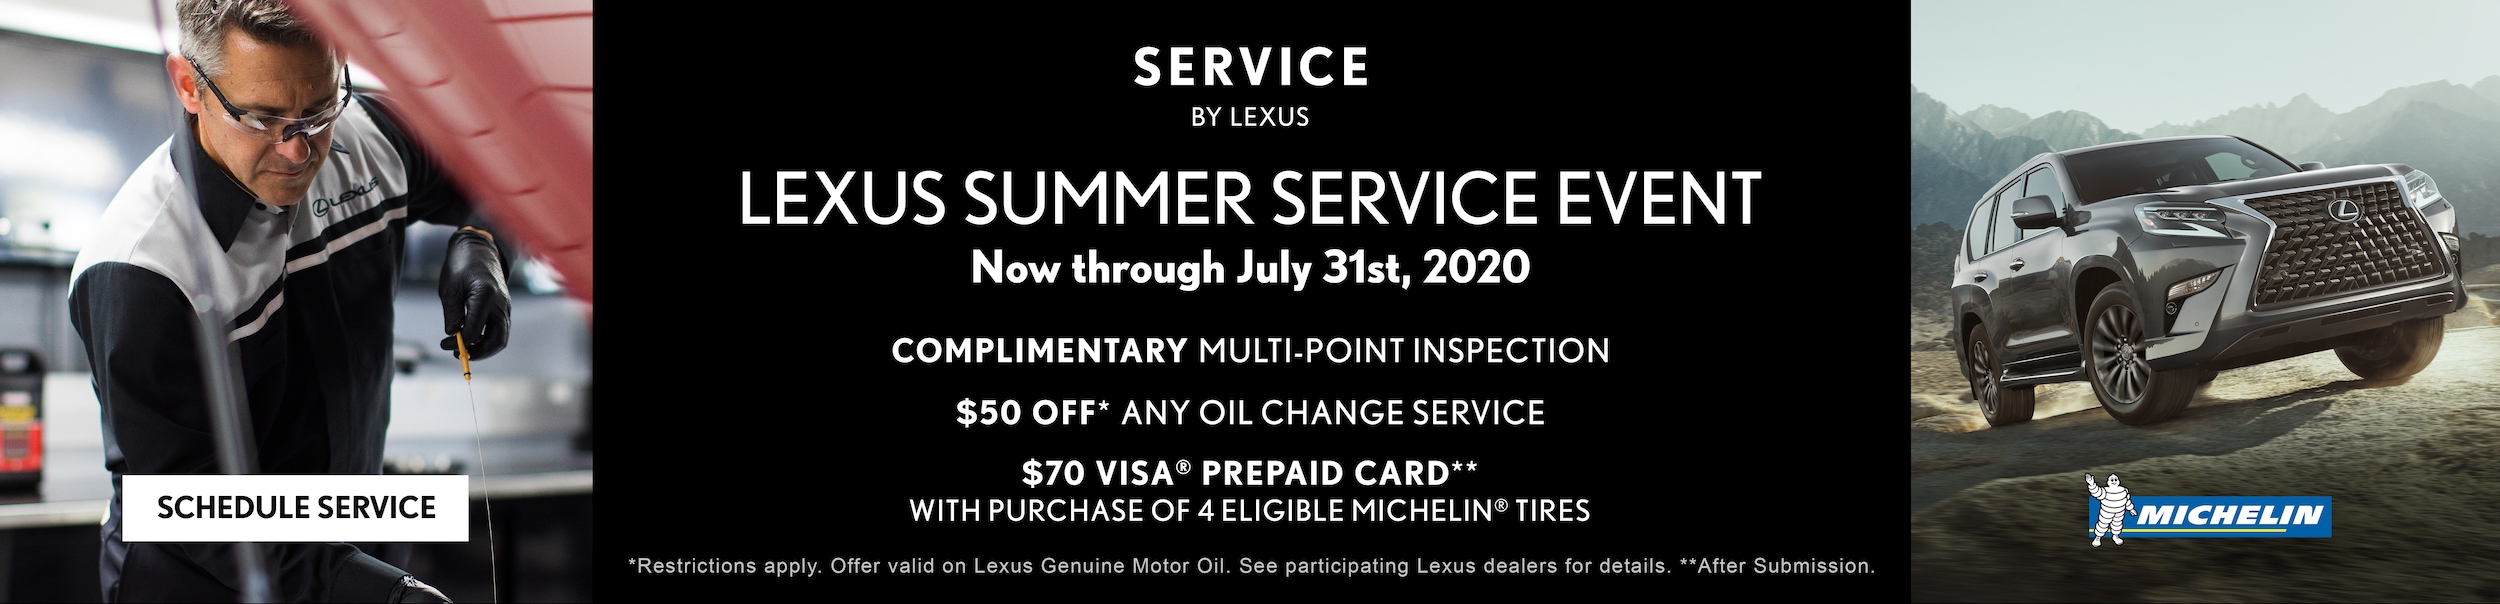 SERVICE SPECIALS AND COUPONS New Country Lexus of Westport